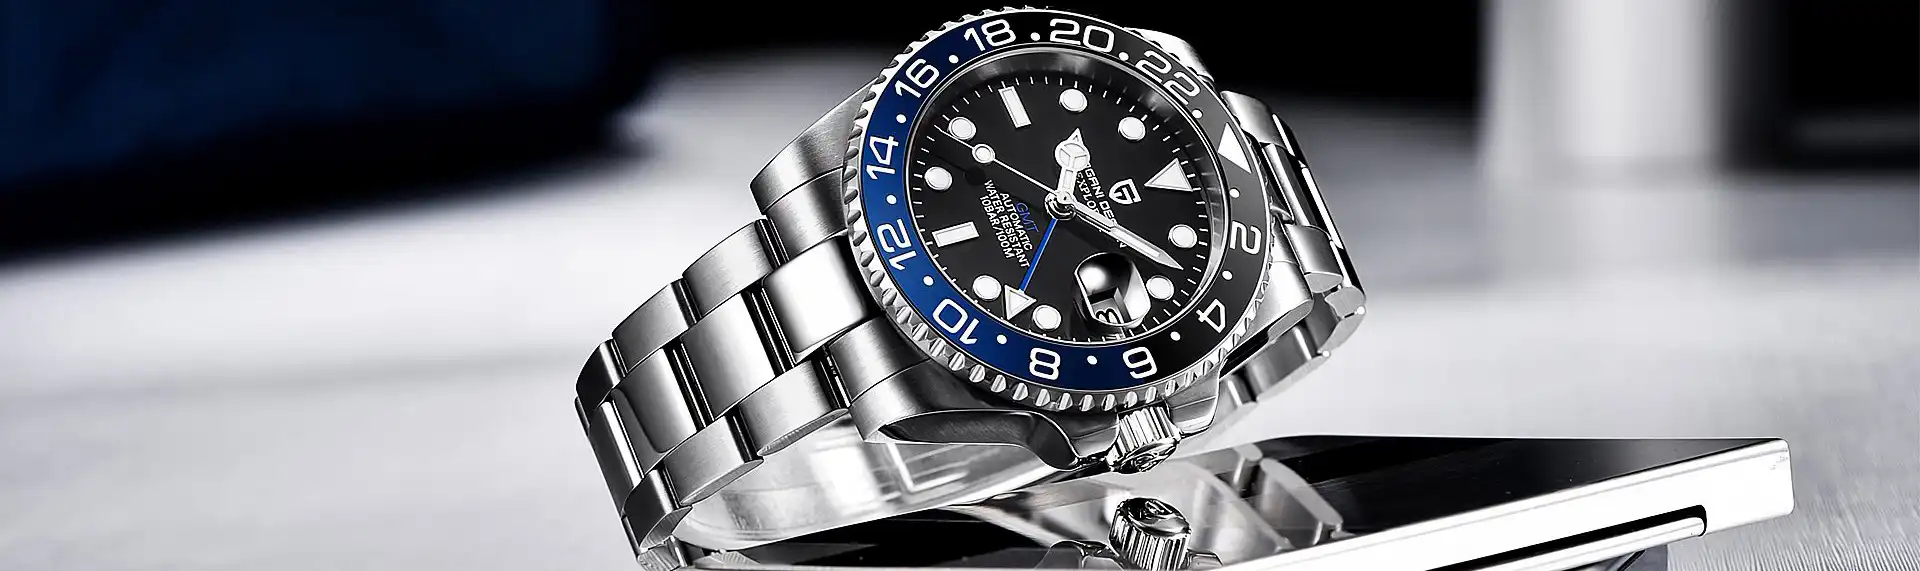 rolex yacht master watches for sale